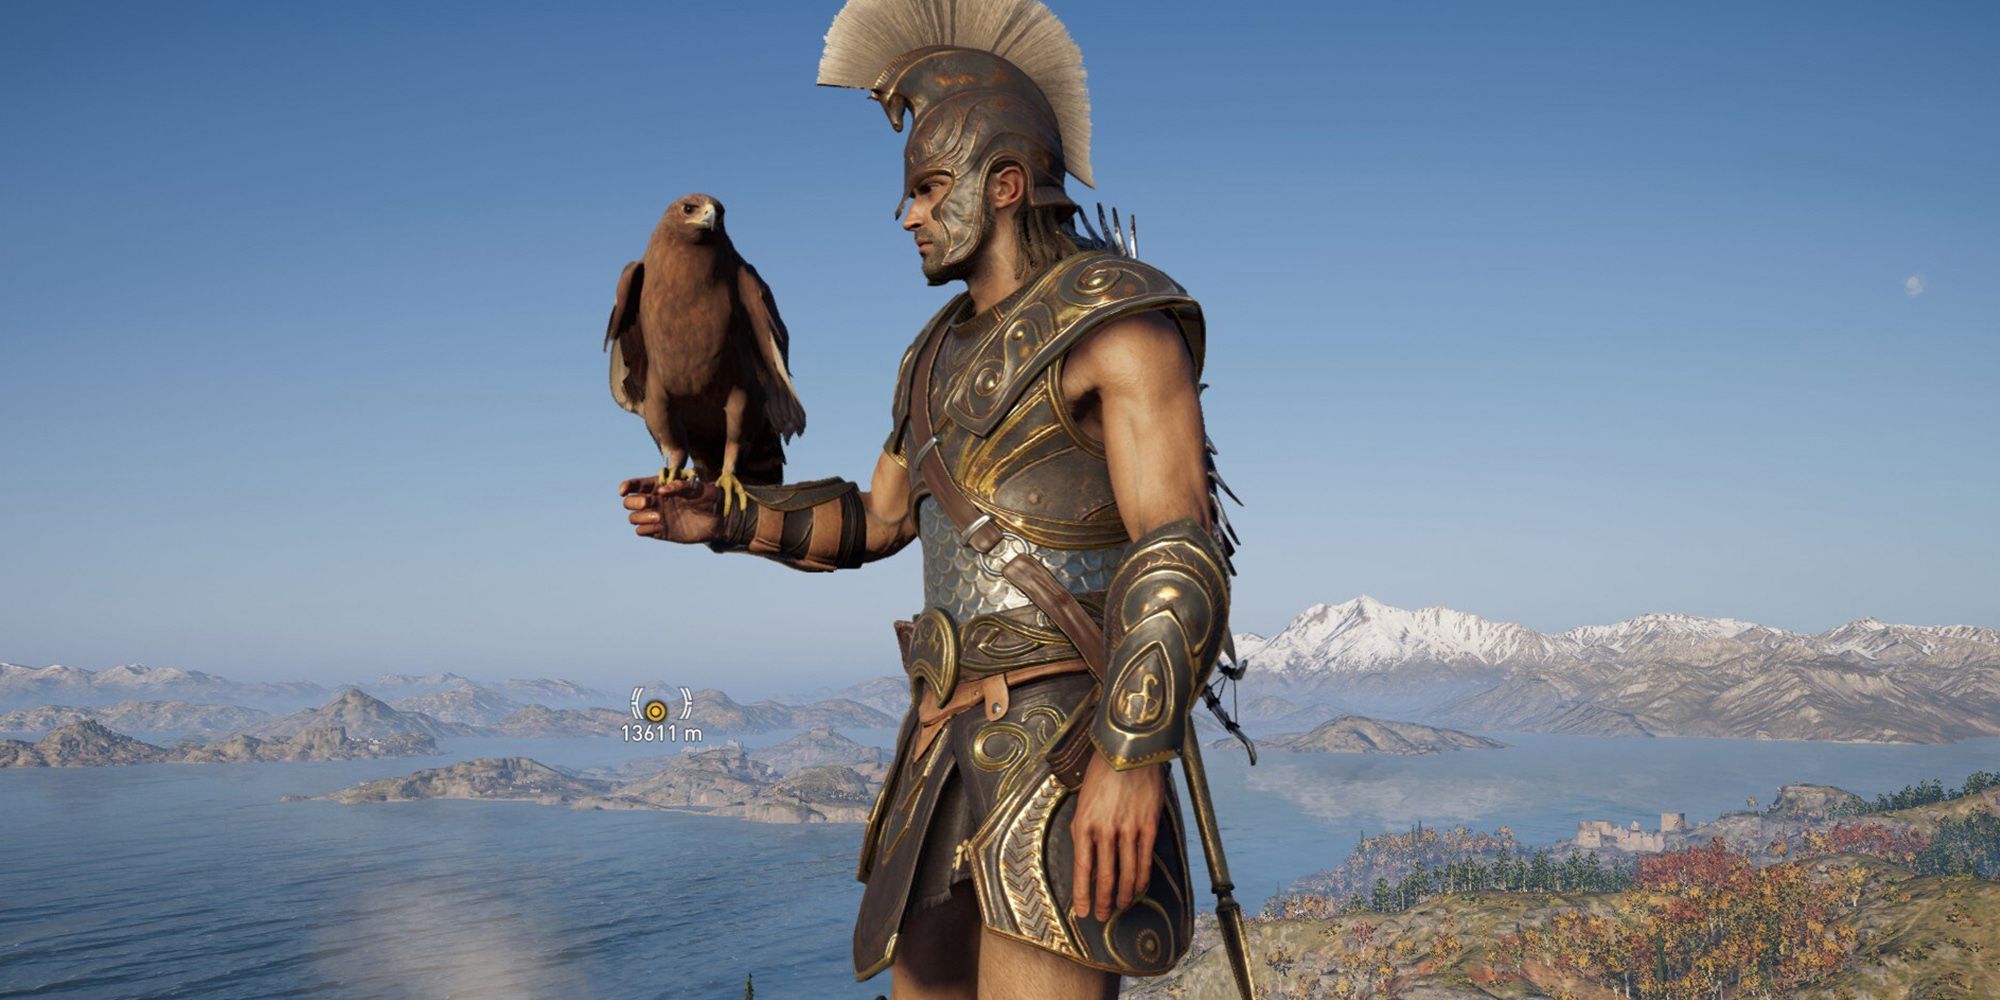 Assassin's Creed Odyssey - Alexios And Ikaros In The Achilles Armor Set